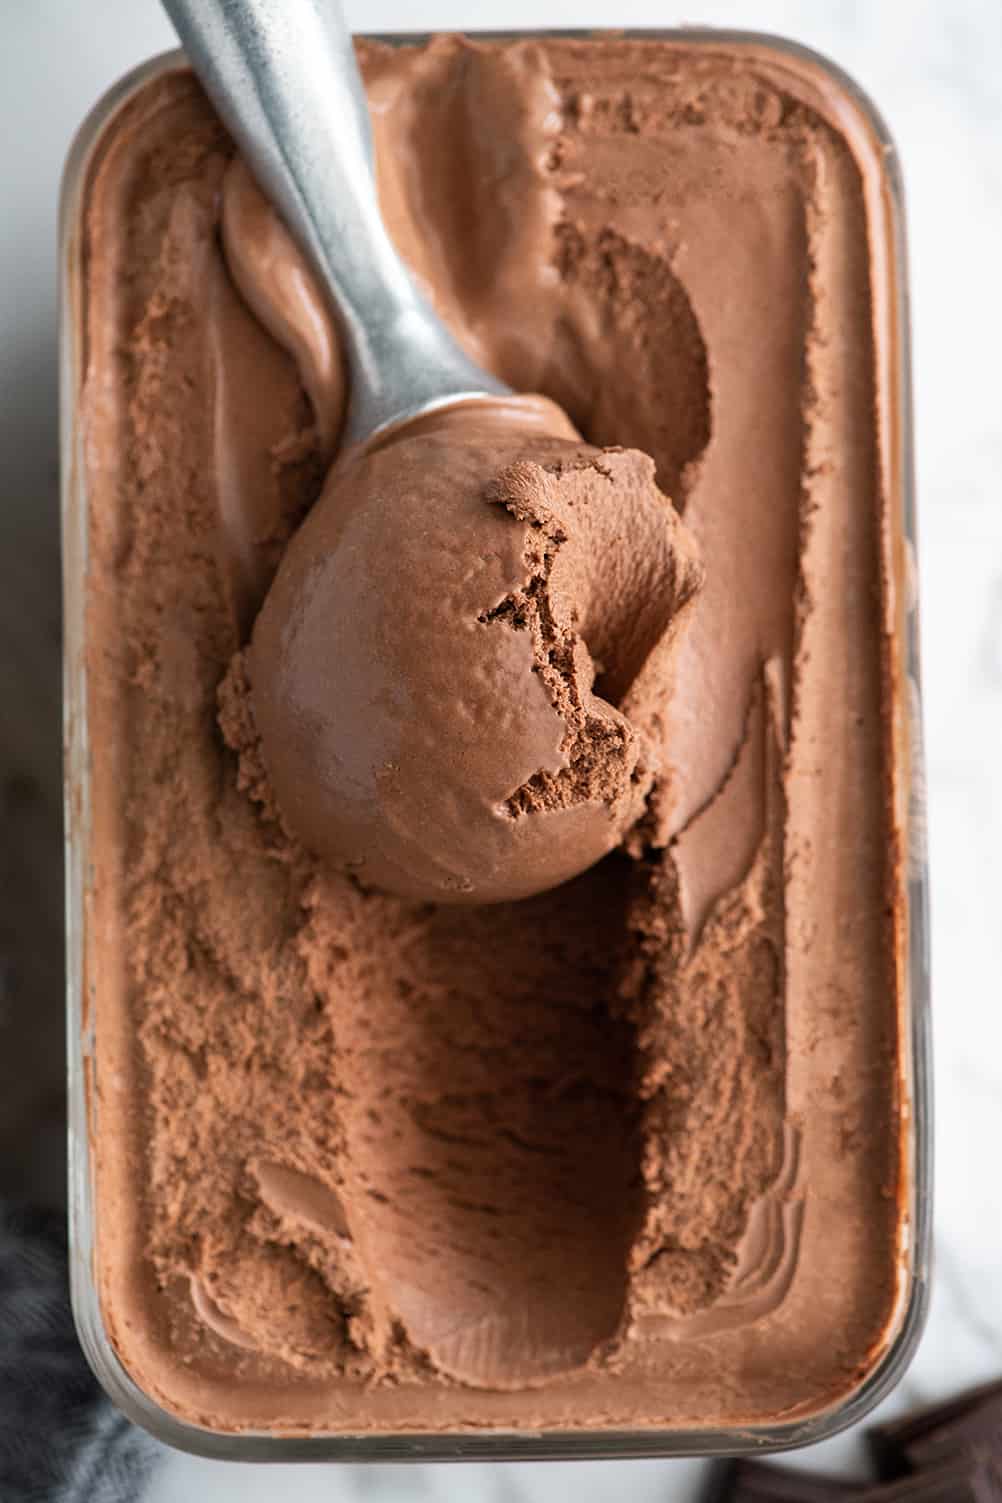 Overhead photo of an ice cream scoop scooping some chocolate ice cream out of a glass storage container